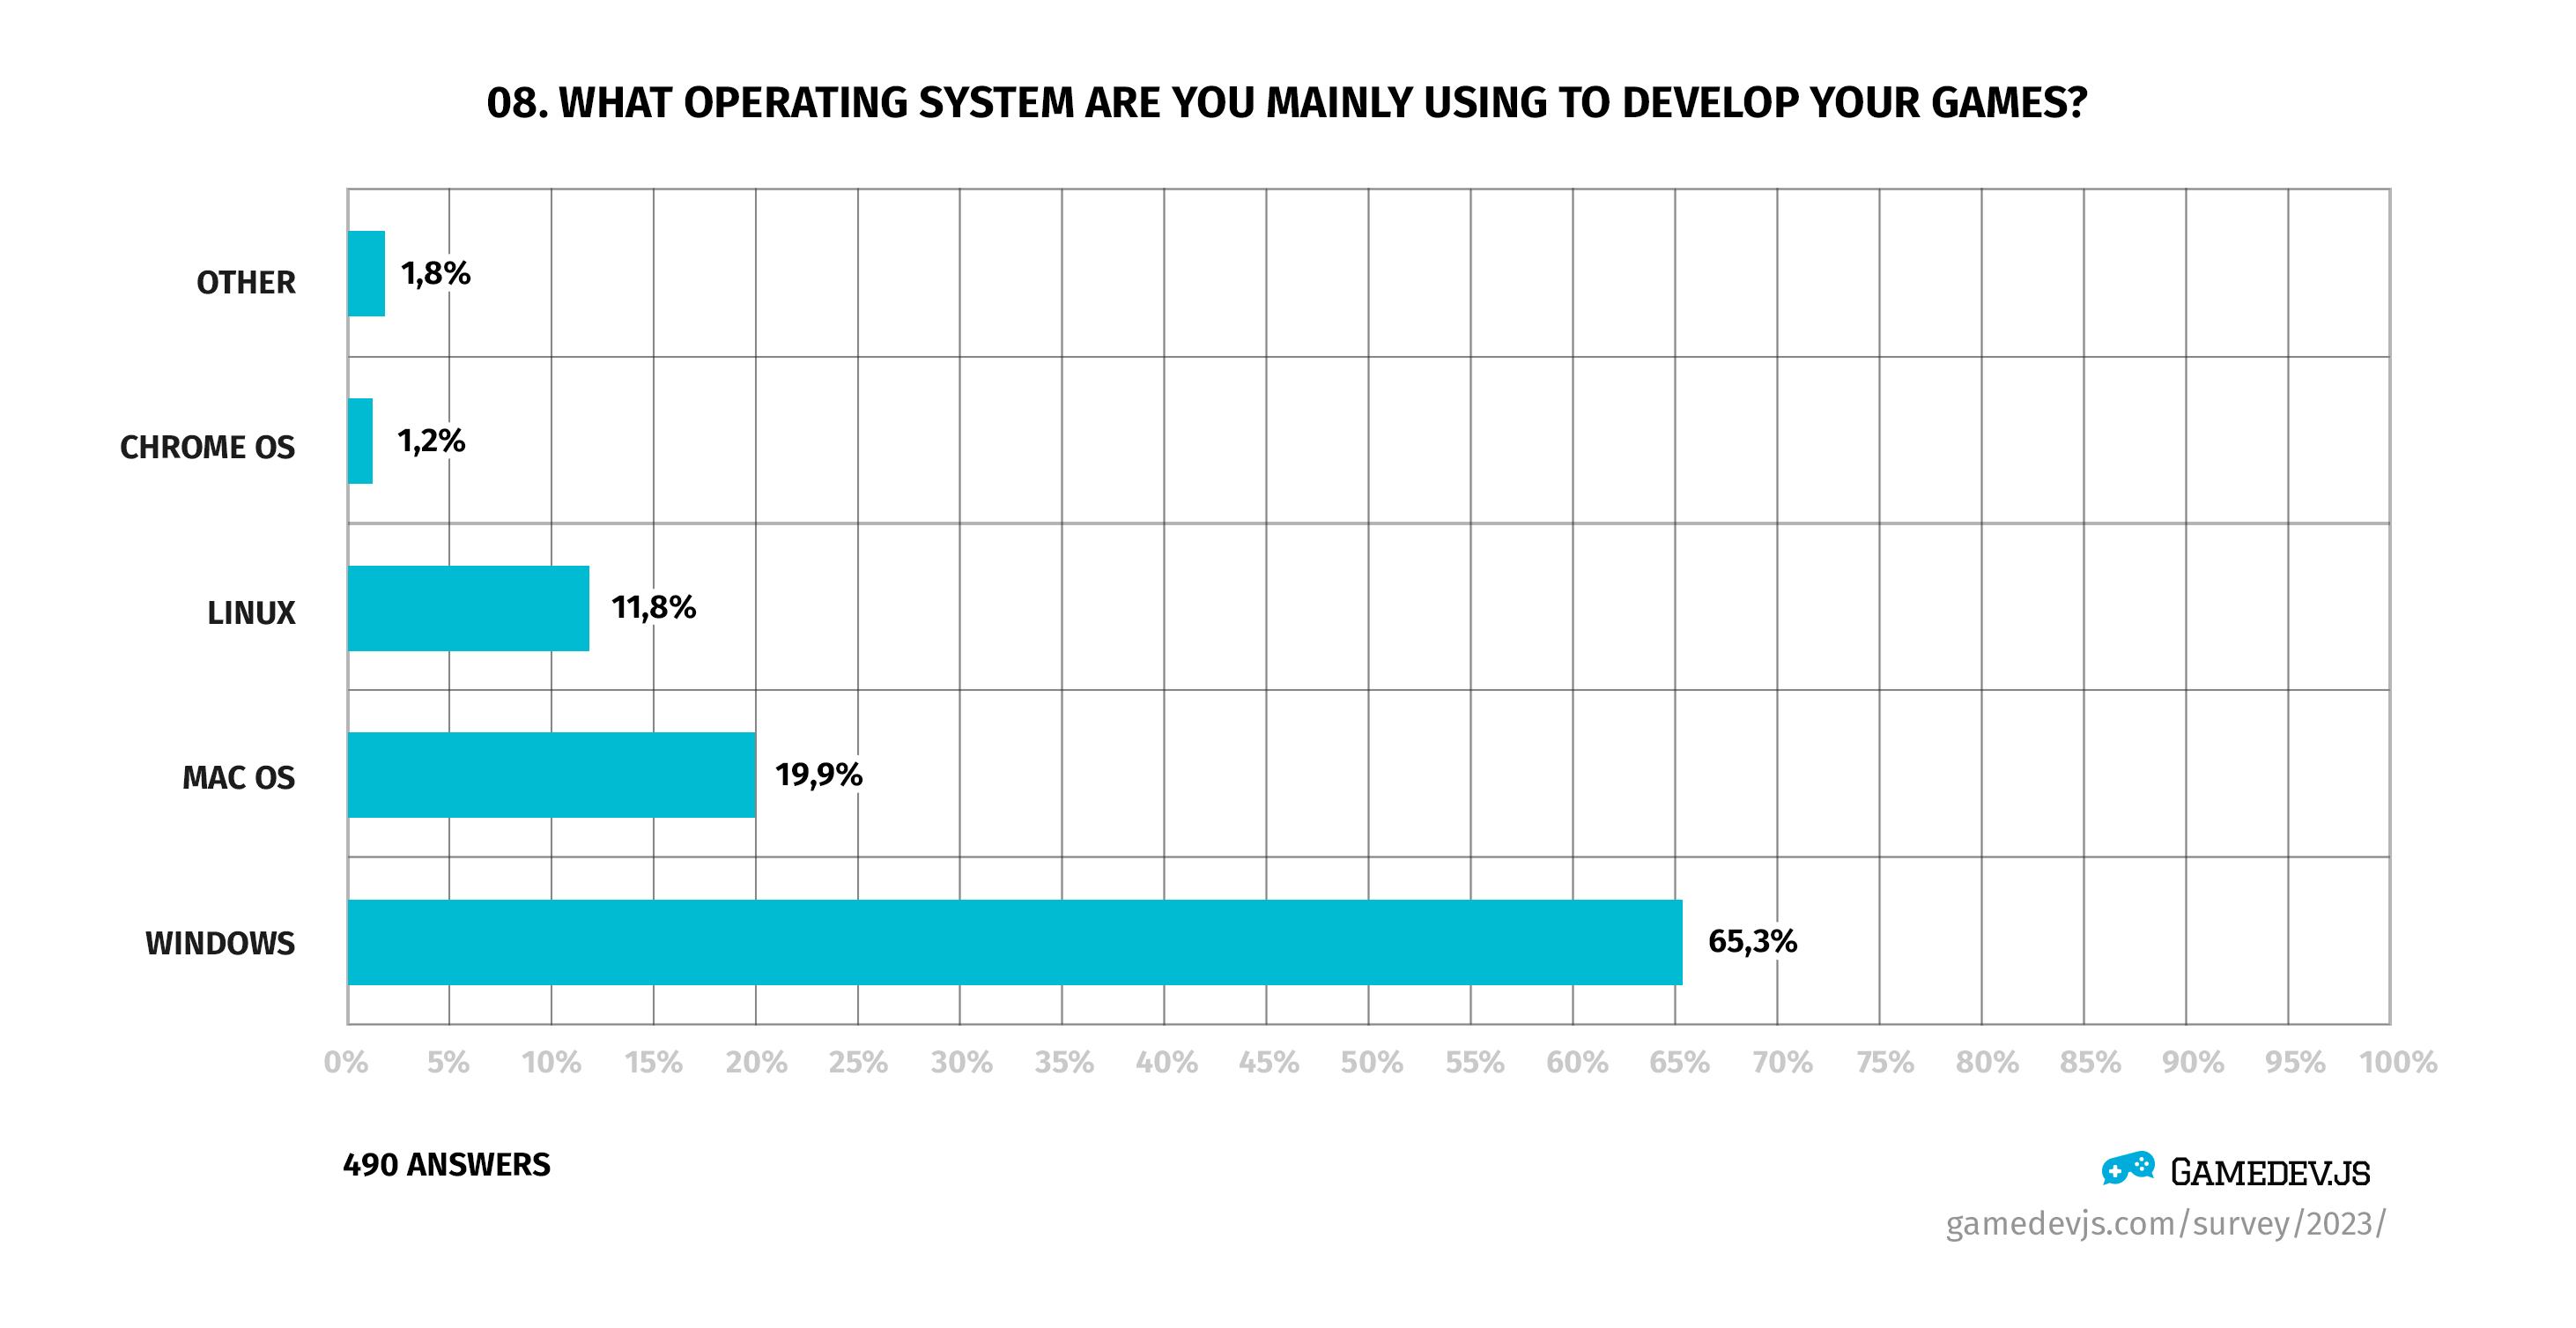 Gamedev.js Survey 2023 - Question #08: What operating system are you mainly using to develop your games?